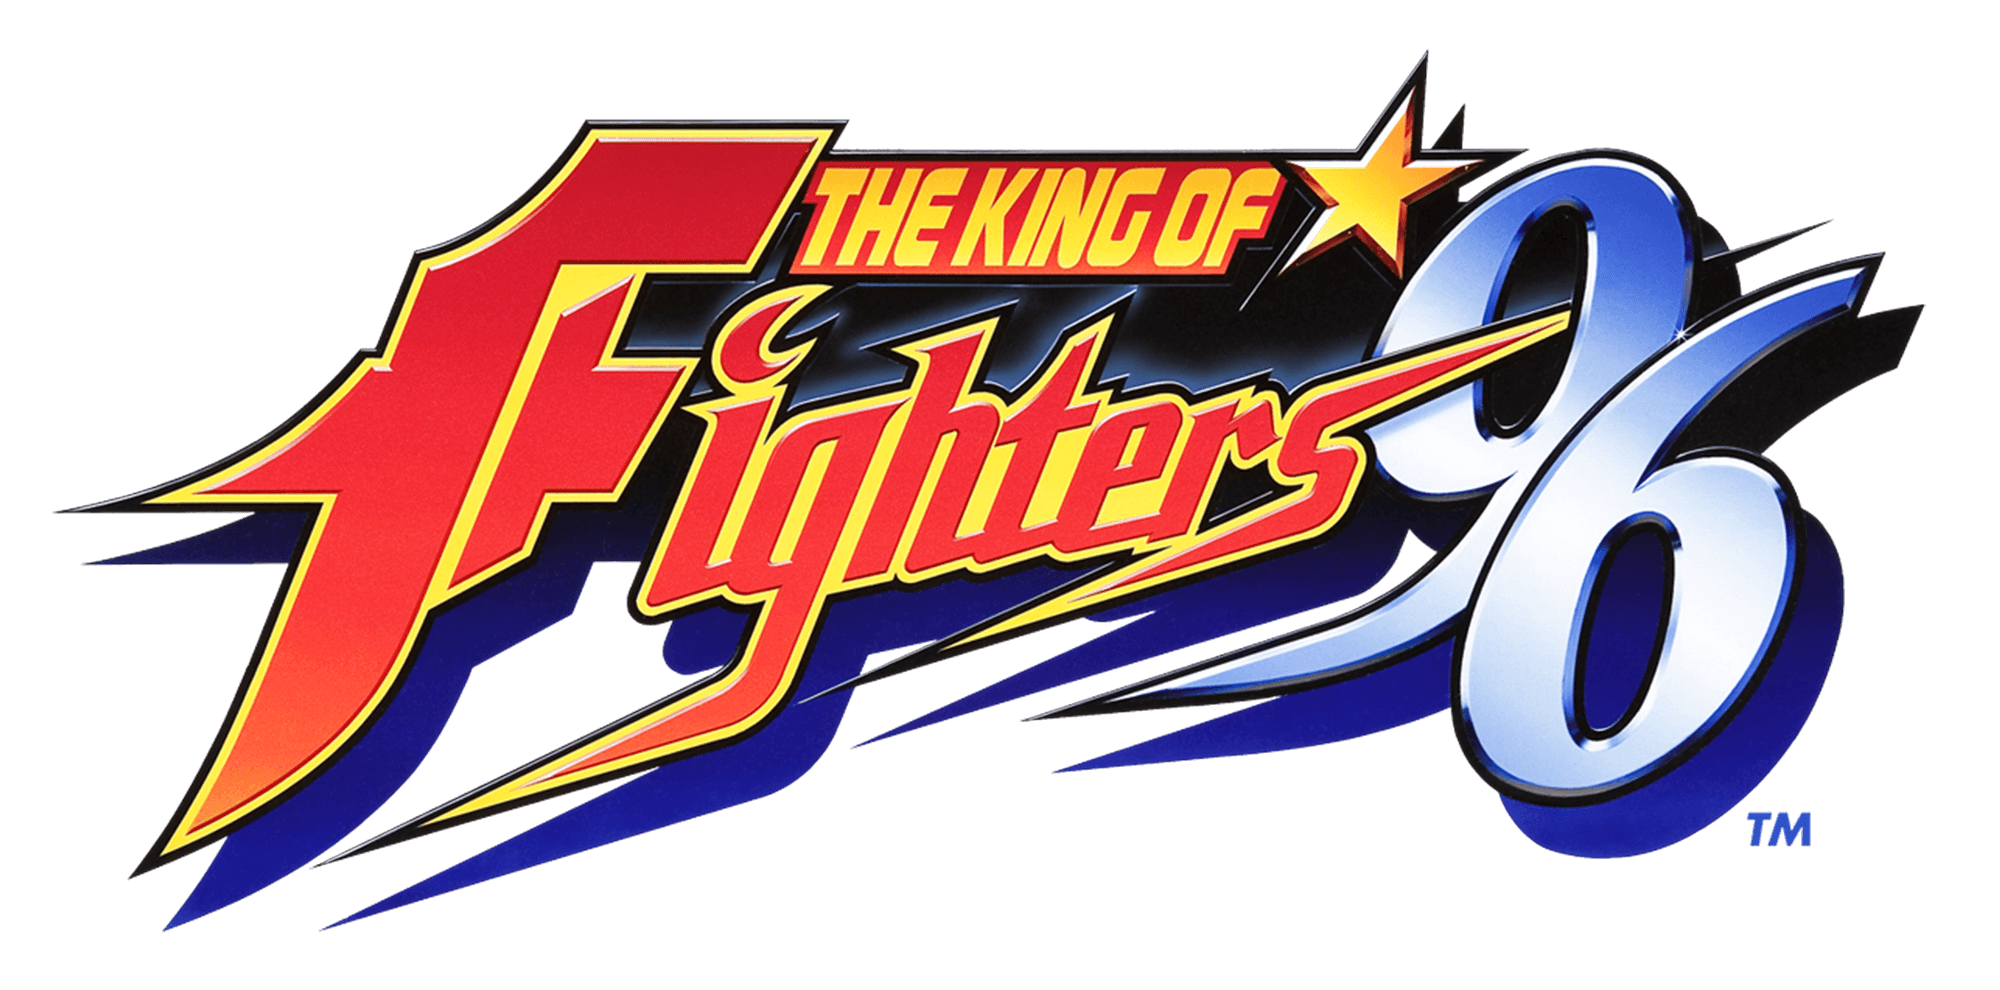 STORY  THE KING OF FIGHTERS PORTAL SITE